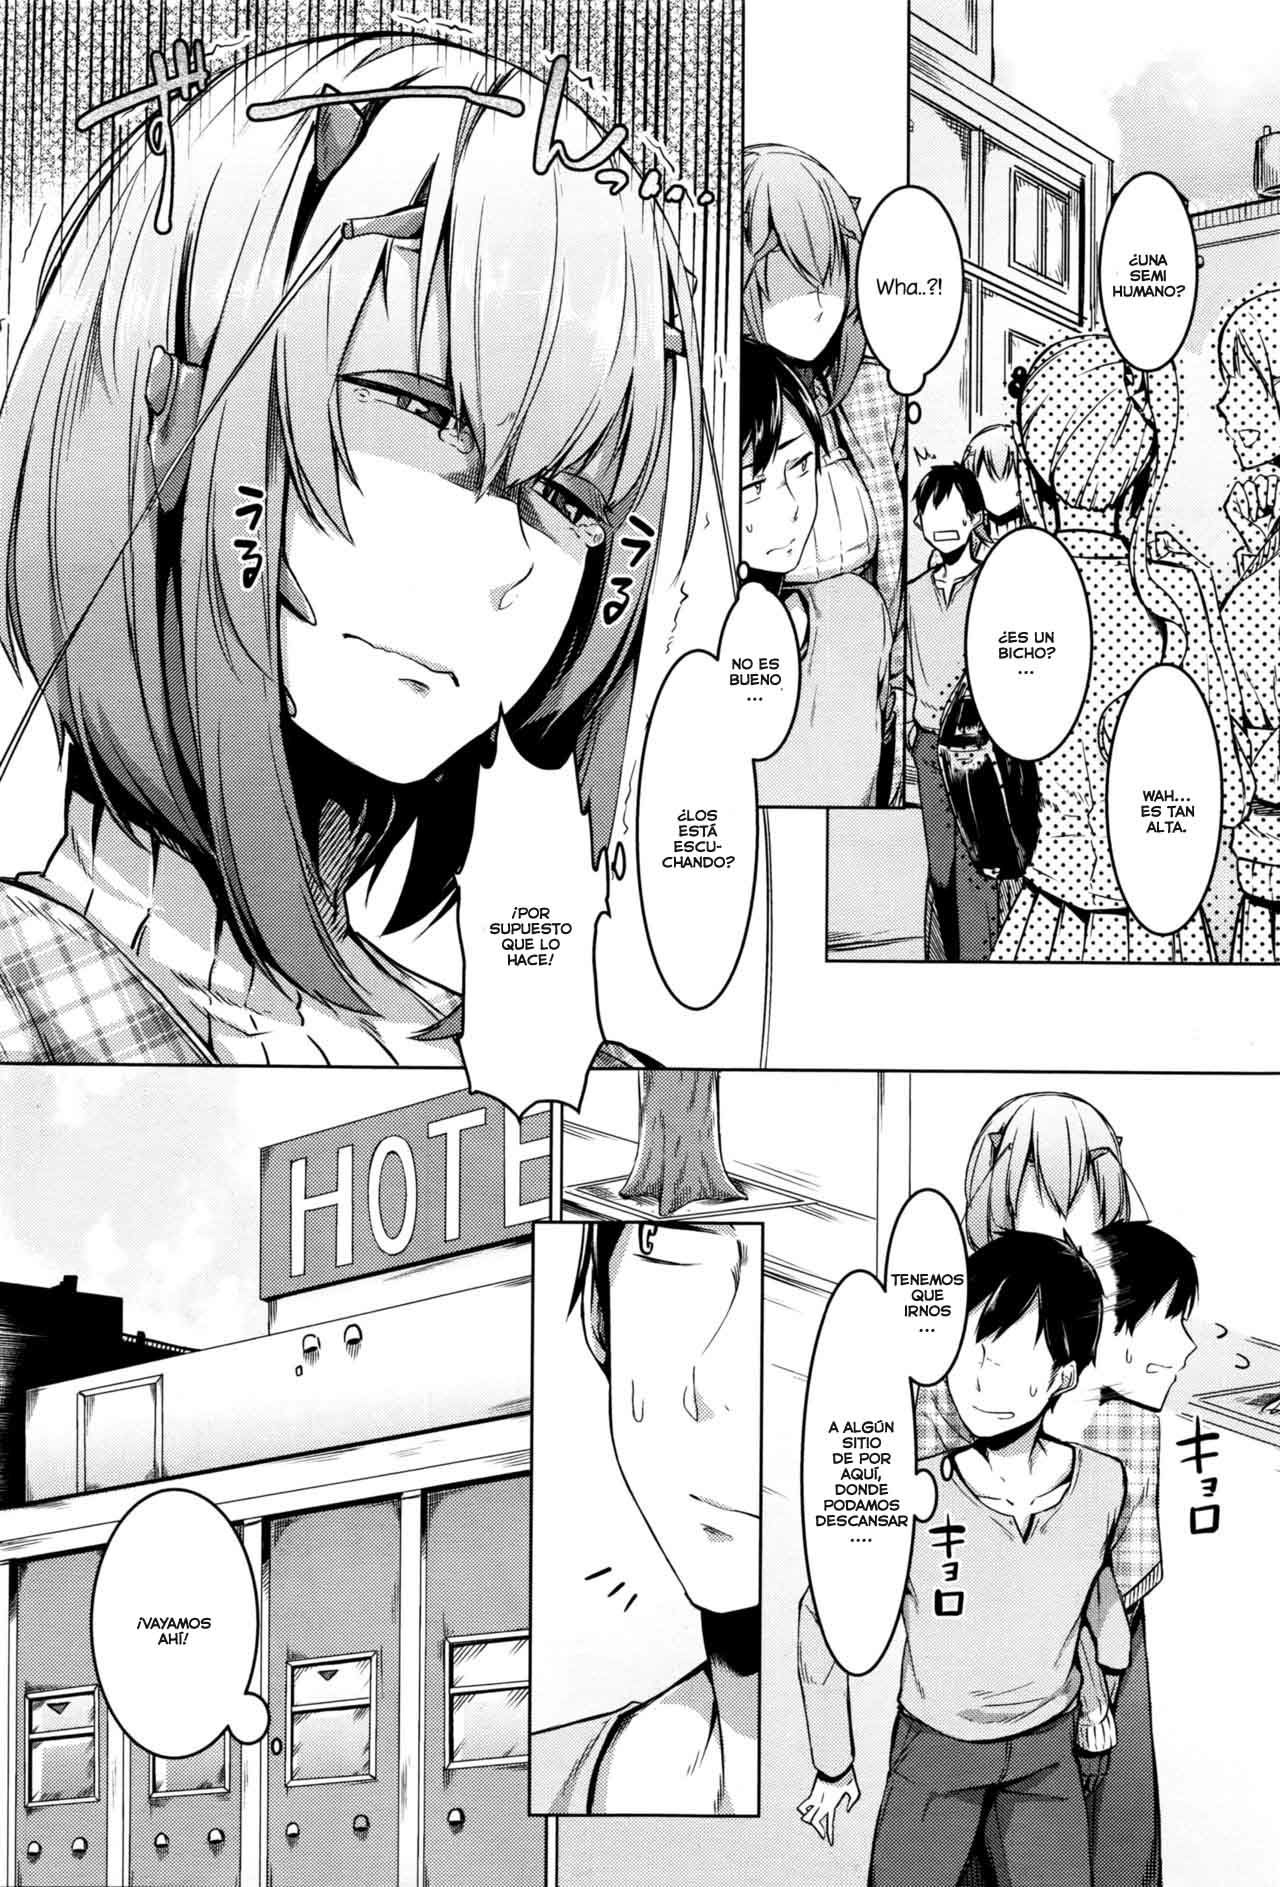 Love s"T"ickness girl (Insect Girl) - Capitulo 1 - 4